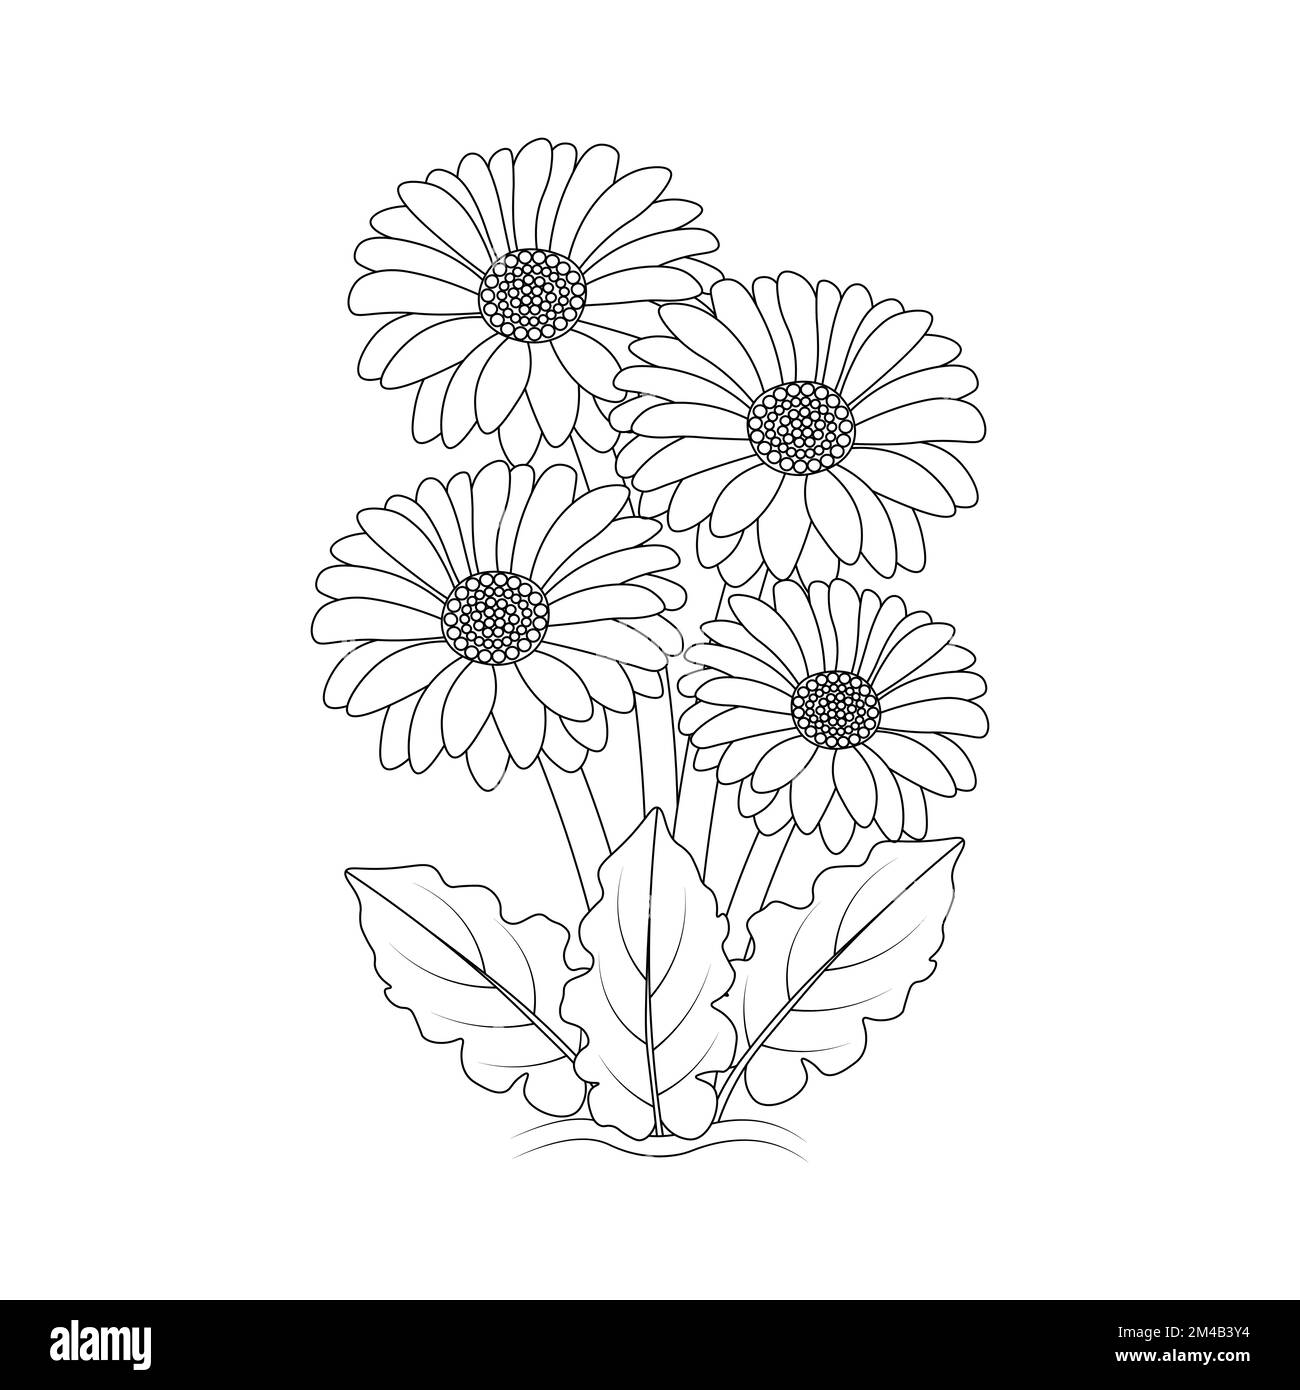 blossom daisy flower simplicity sketchy with artistic illustration on isolate background Stock Vector